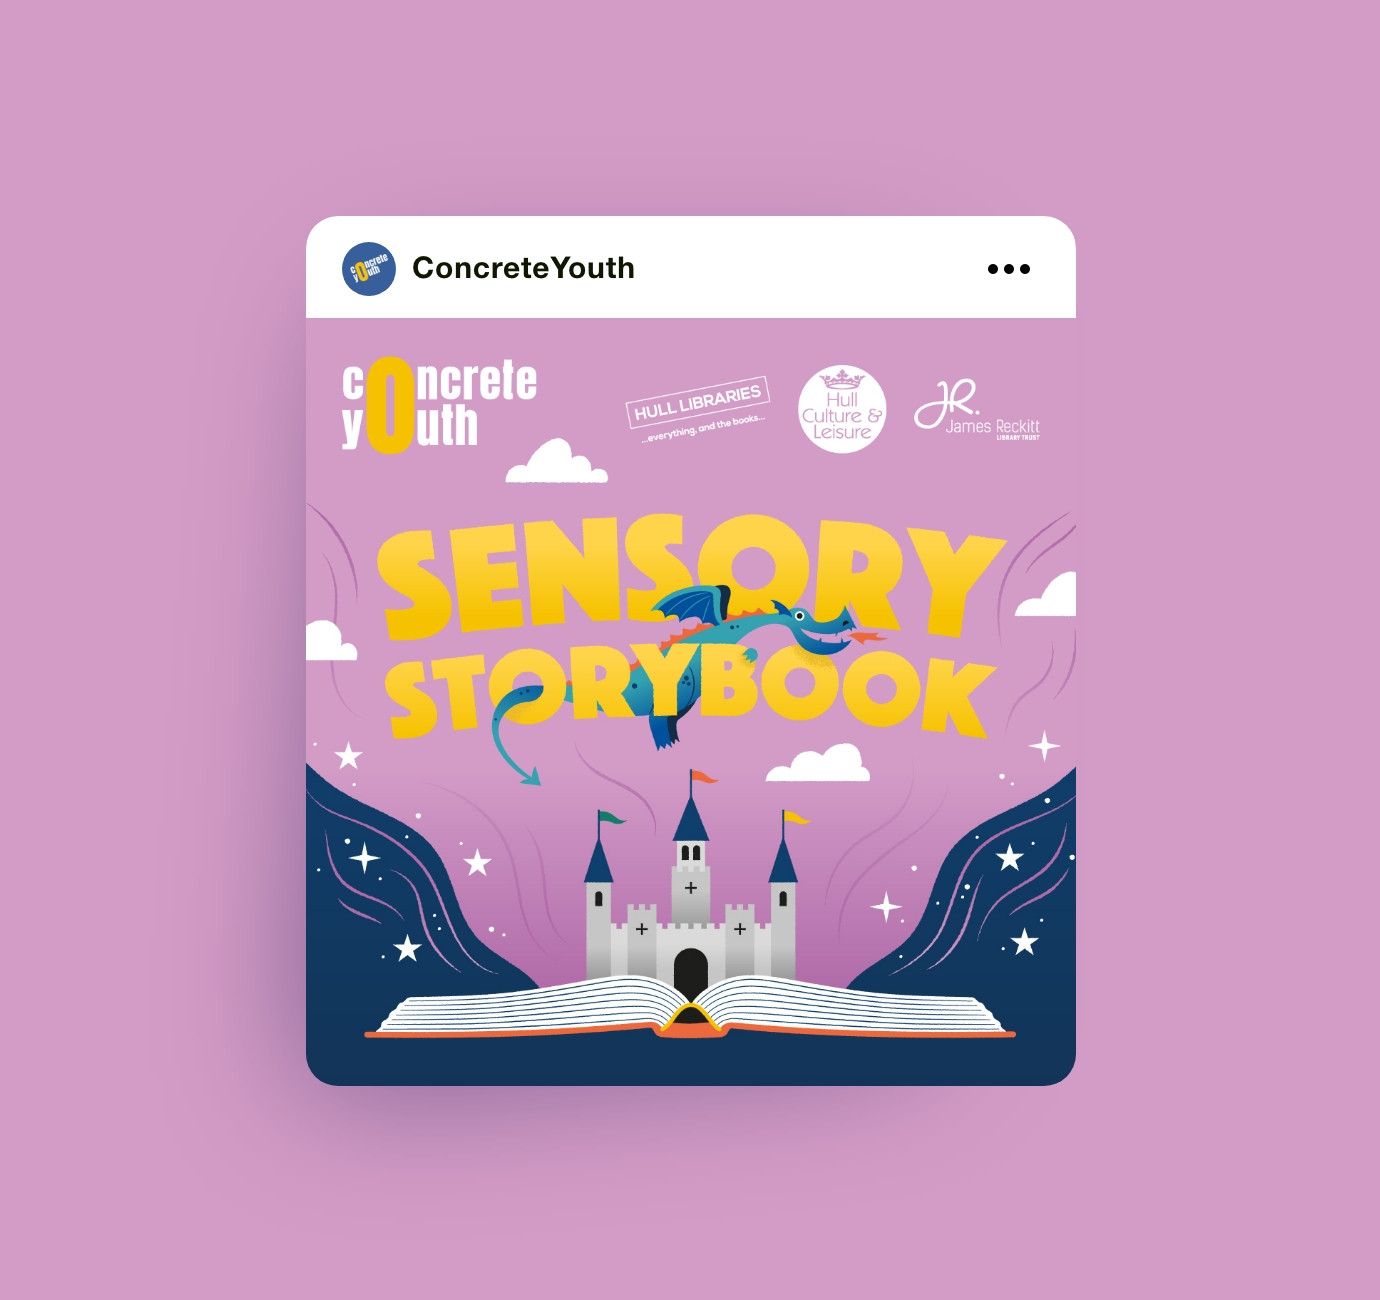 Concrete Youth charity Sensory Storybook social media design by Root Studio